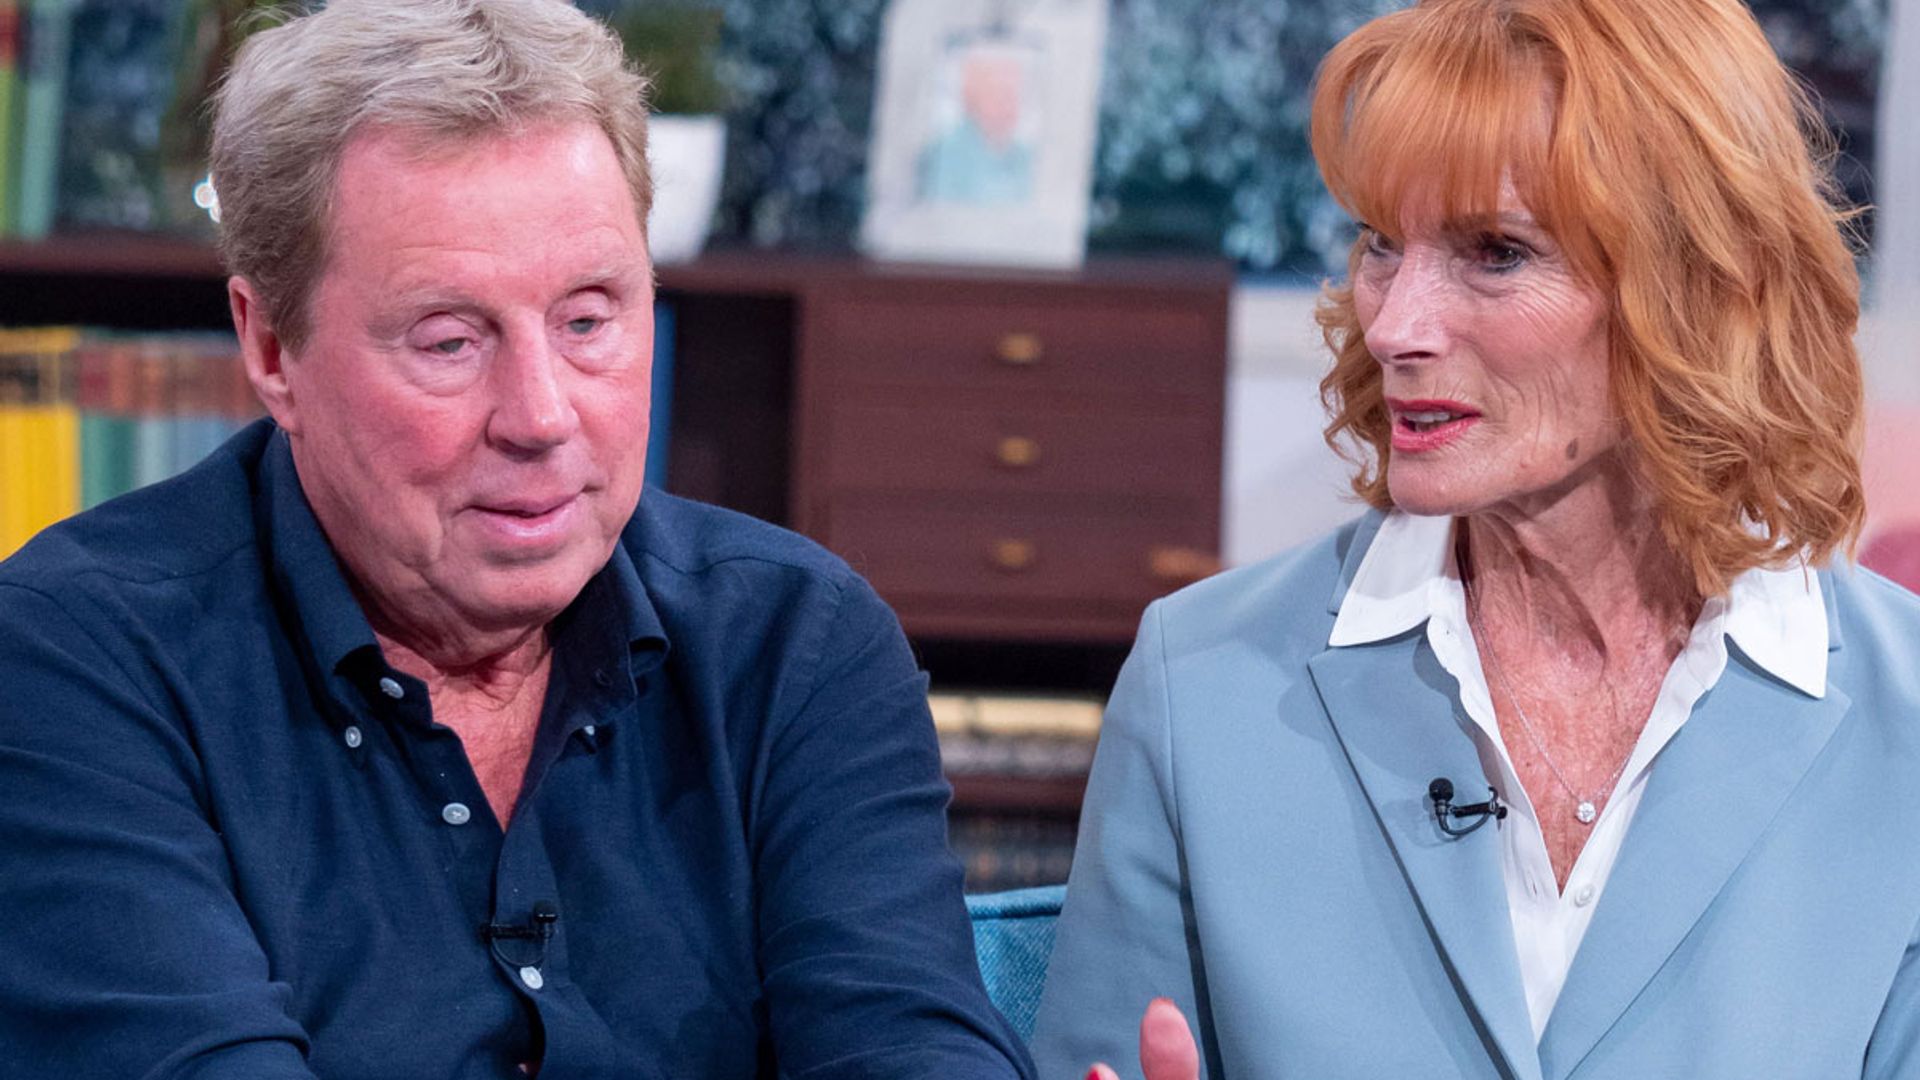 Harry Redknapp's wife Sandra reacts to biggest marriage mistake: 'I was more worried about him'